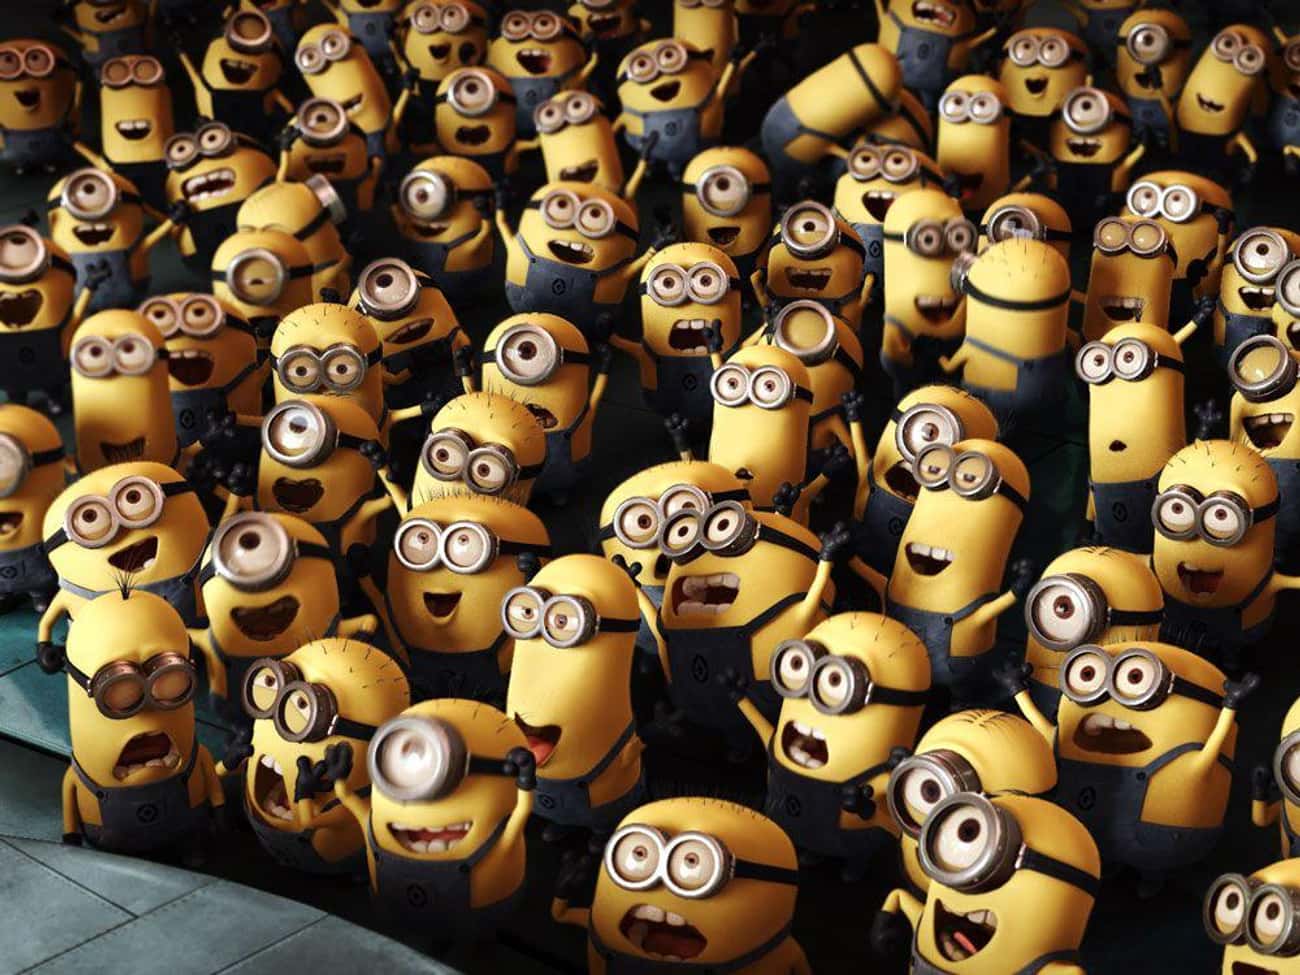 The Minions From 'Despicable Me'